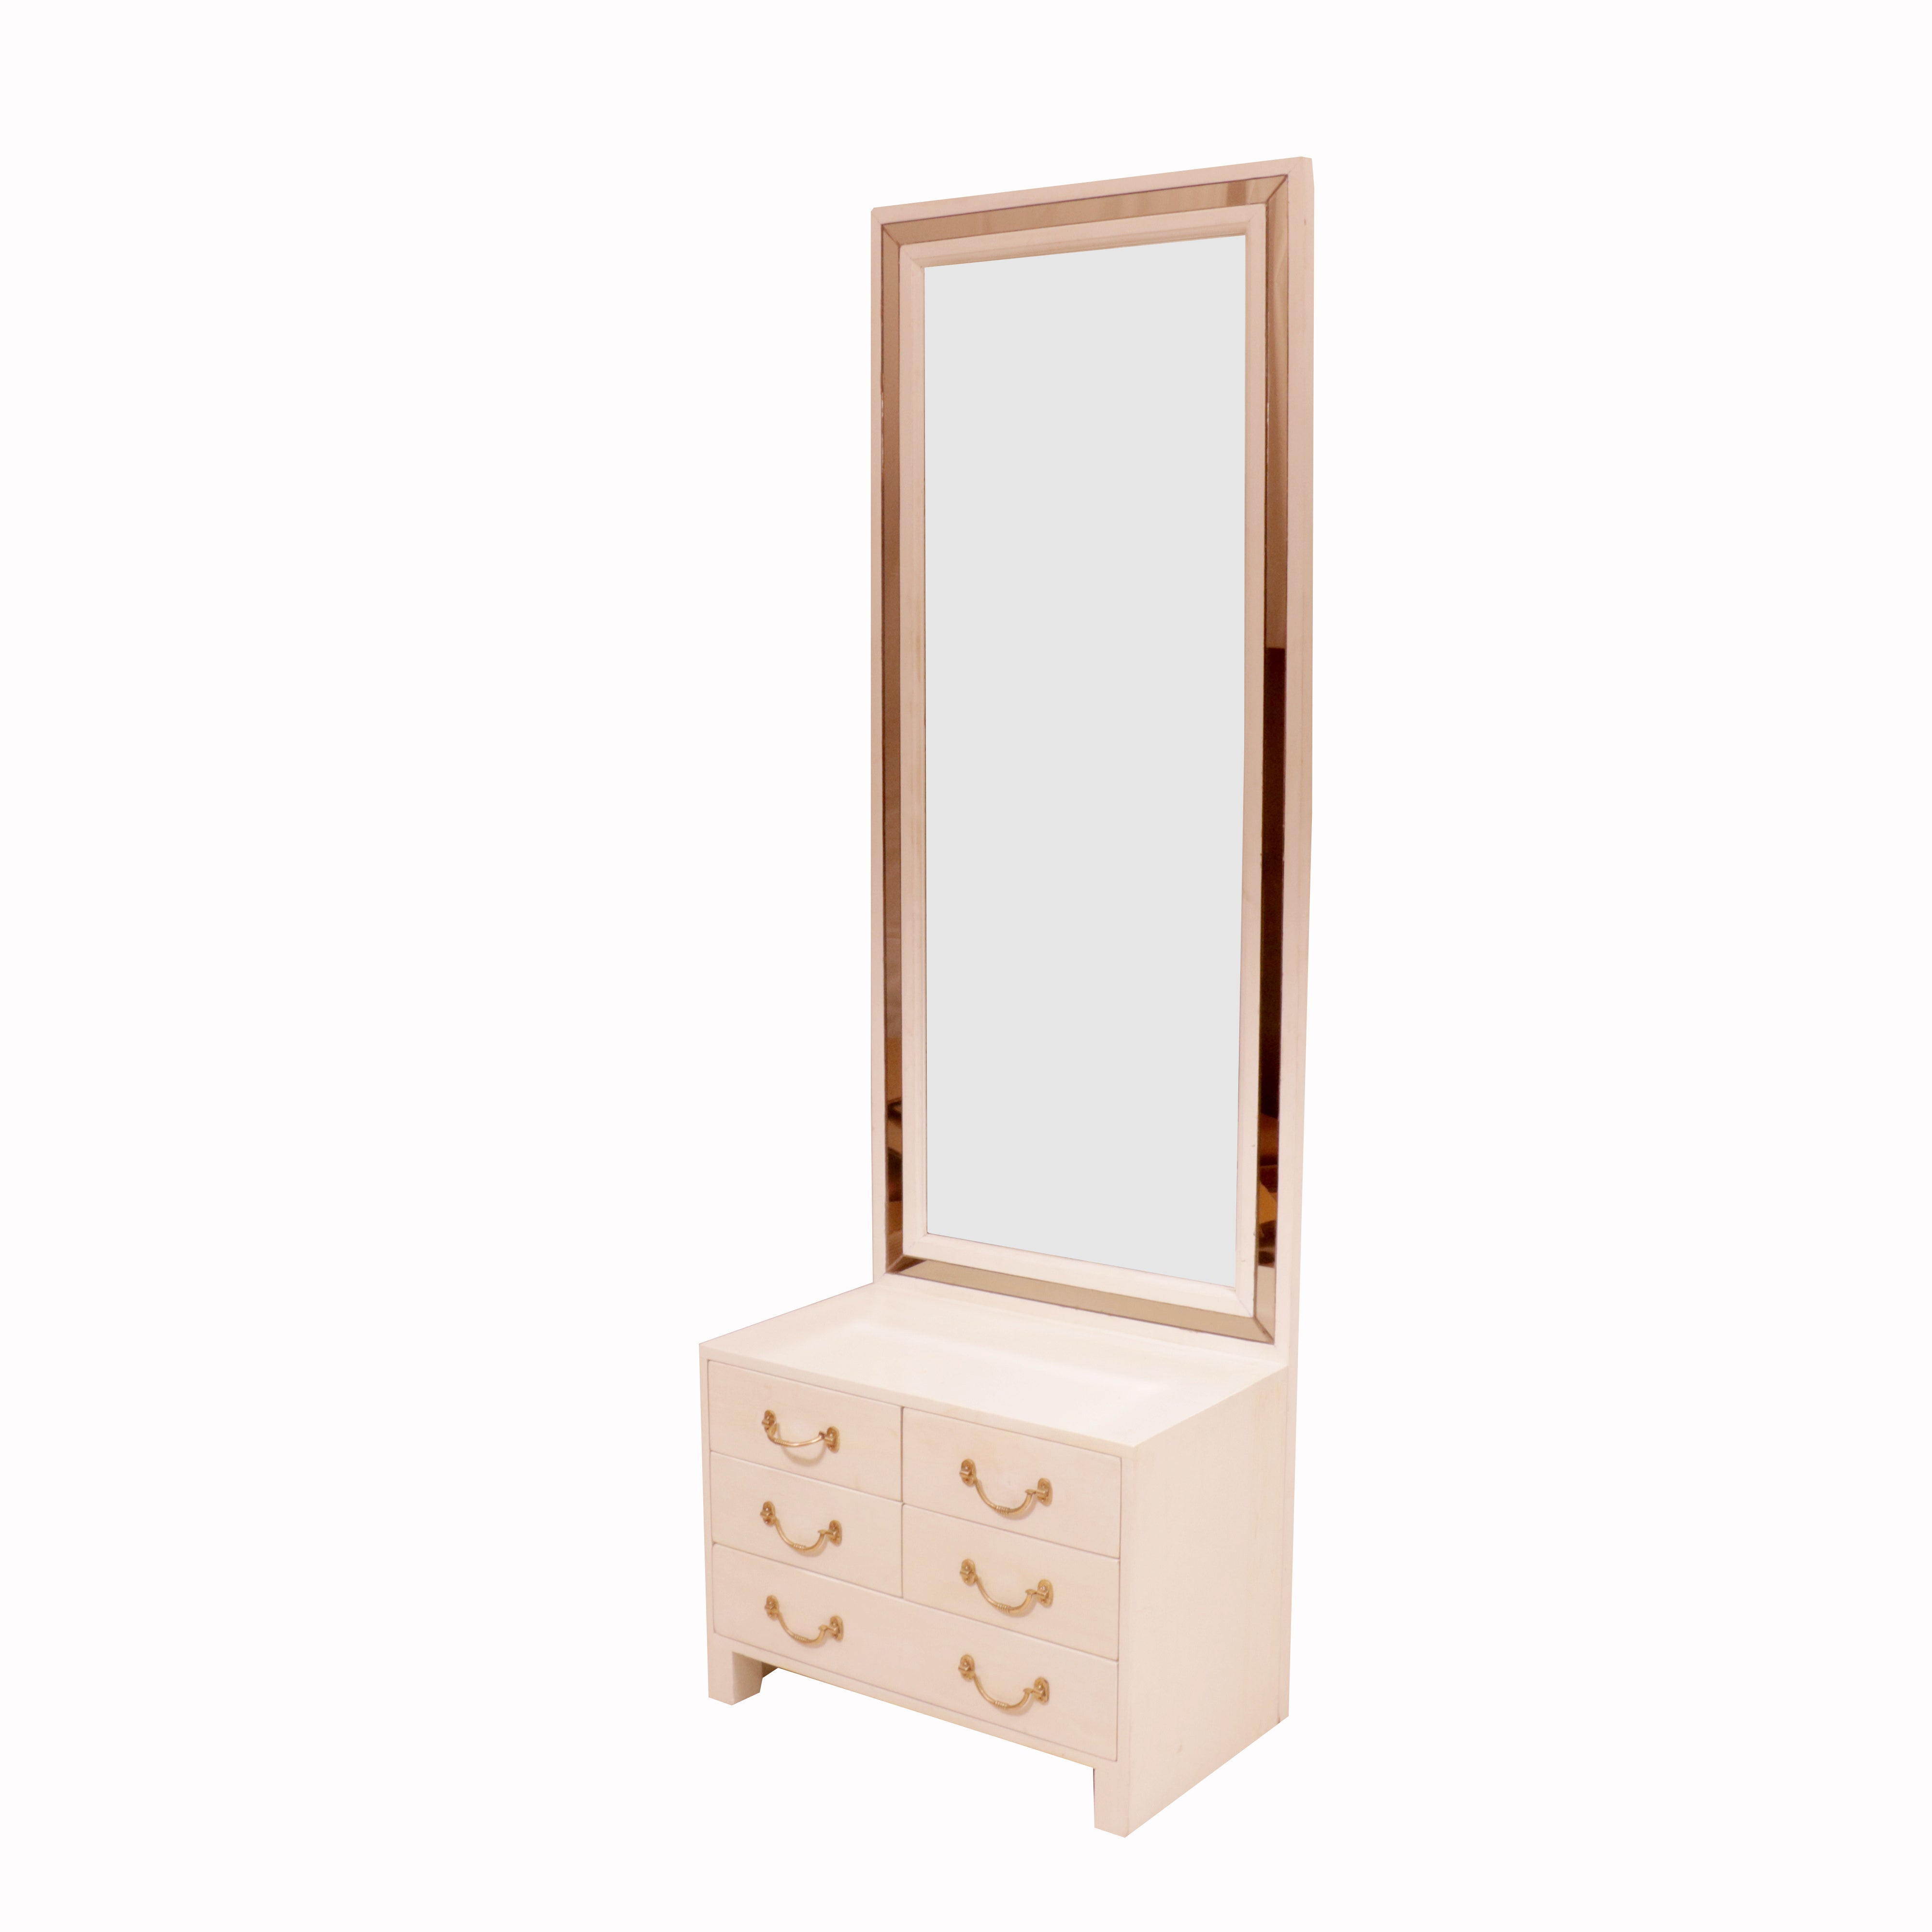 White Mirror with Drawers Dressing Table